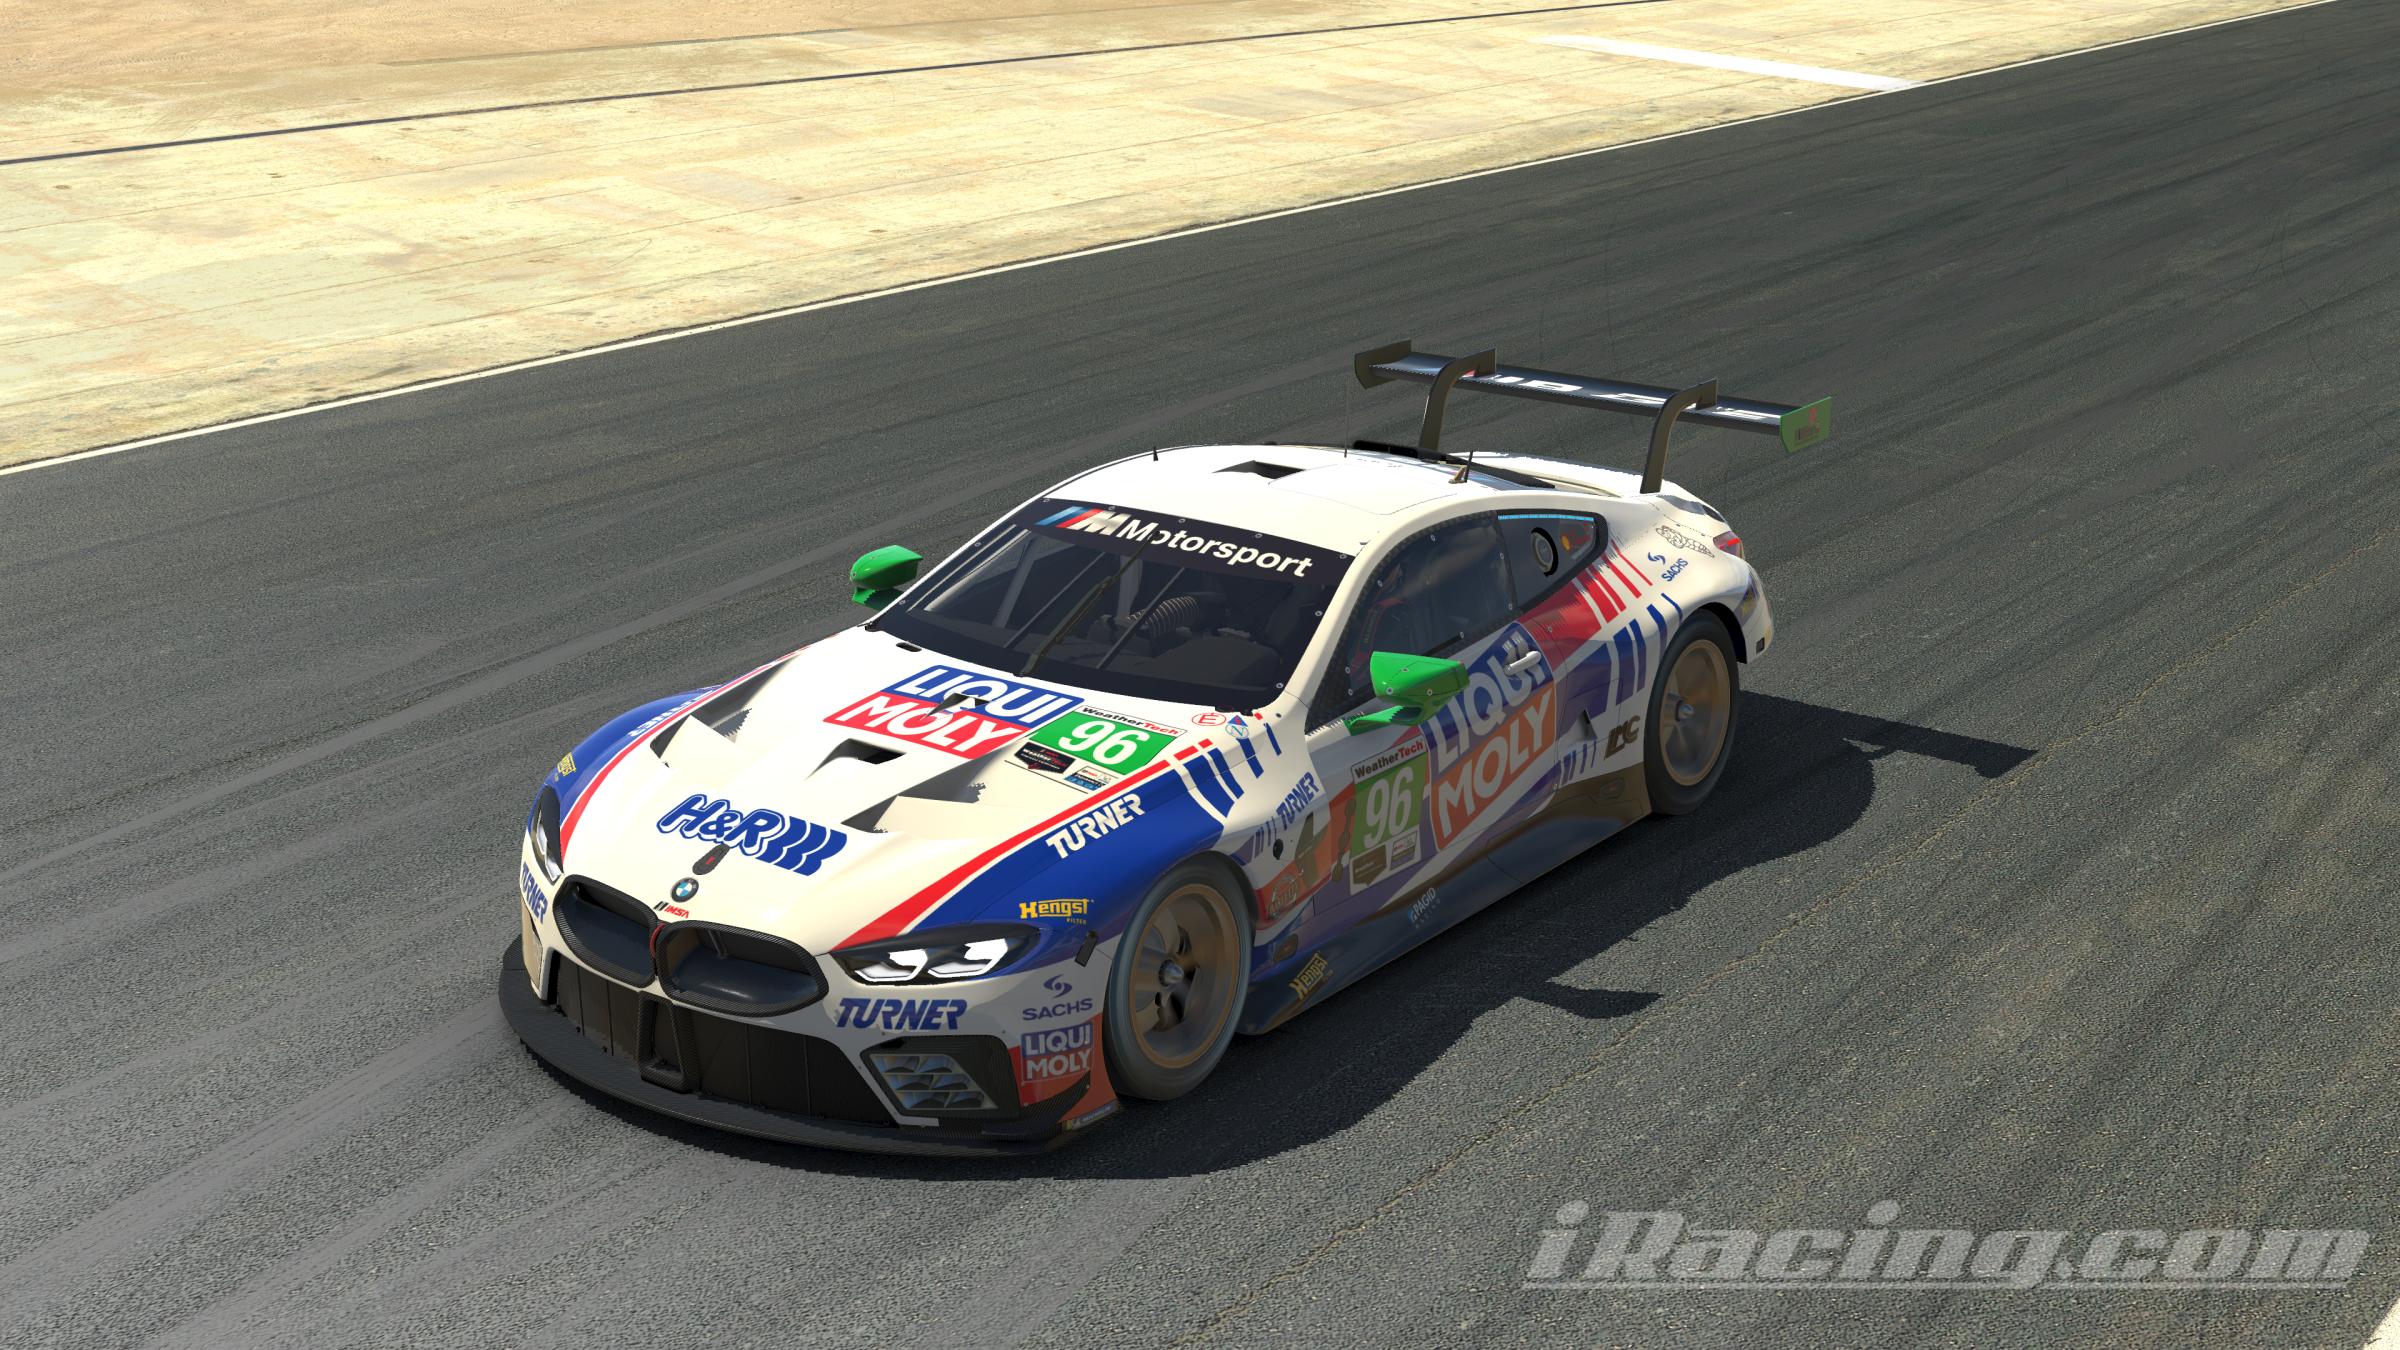 Preview of BMW M8 GTE - 2020 TURNER LIQUI MOLY by Andy Blackmore